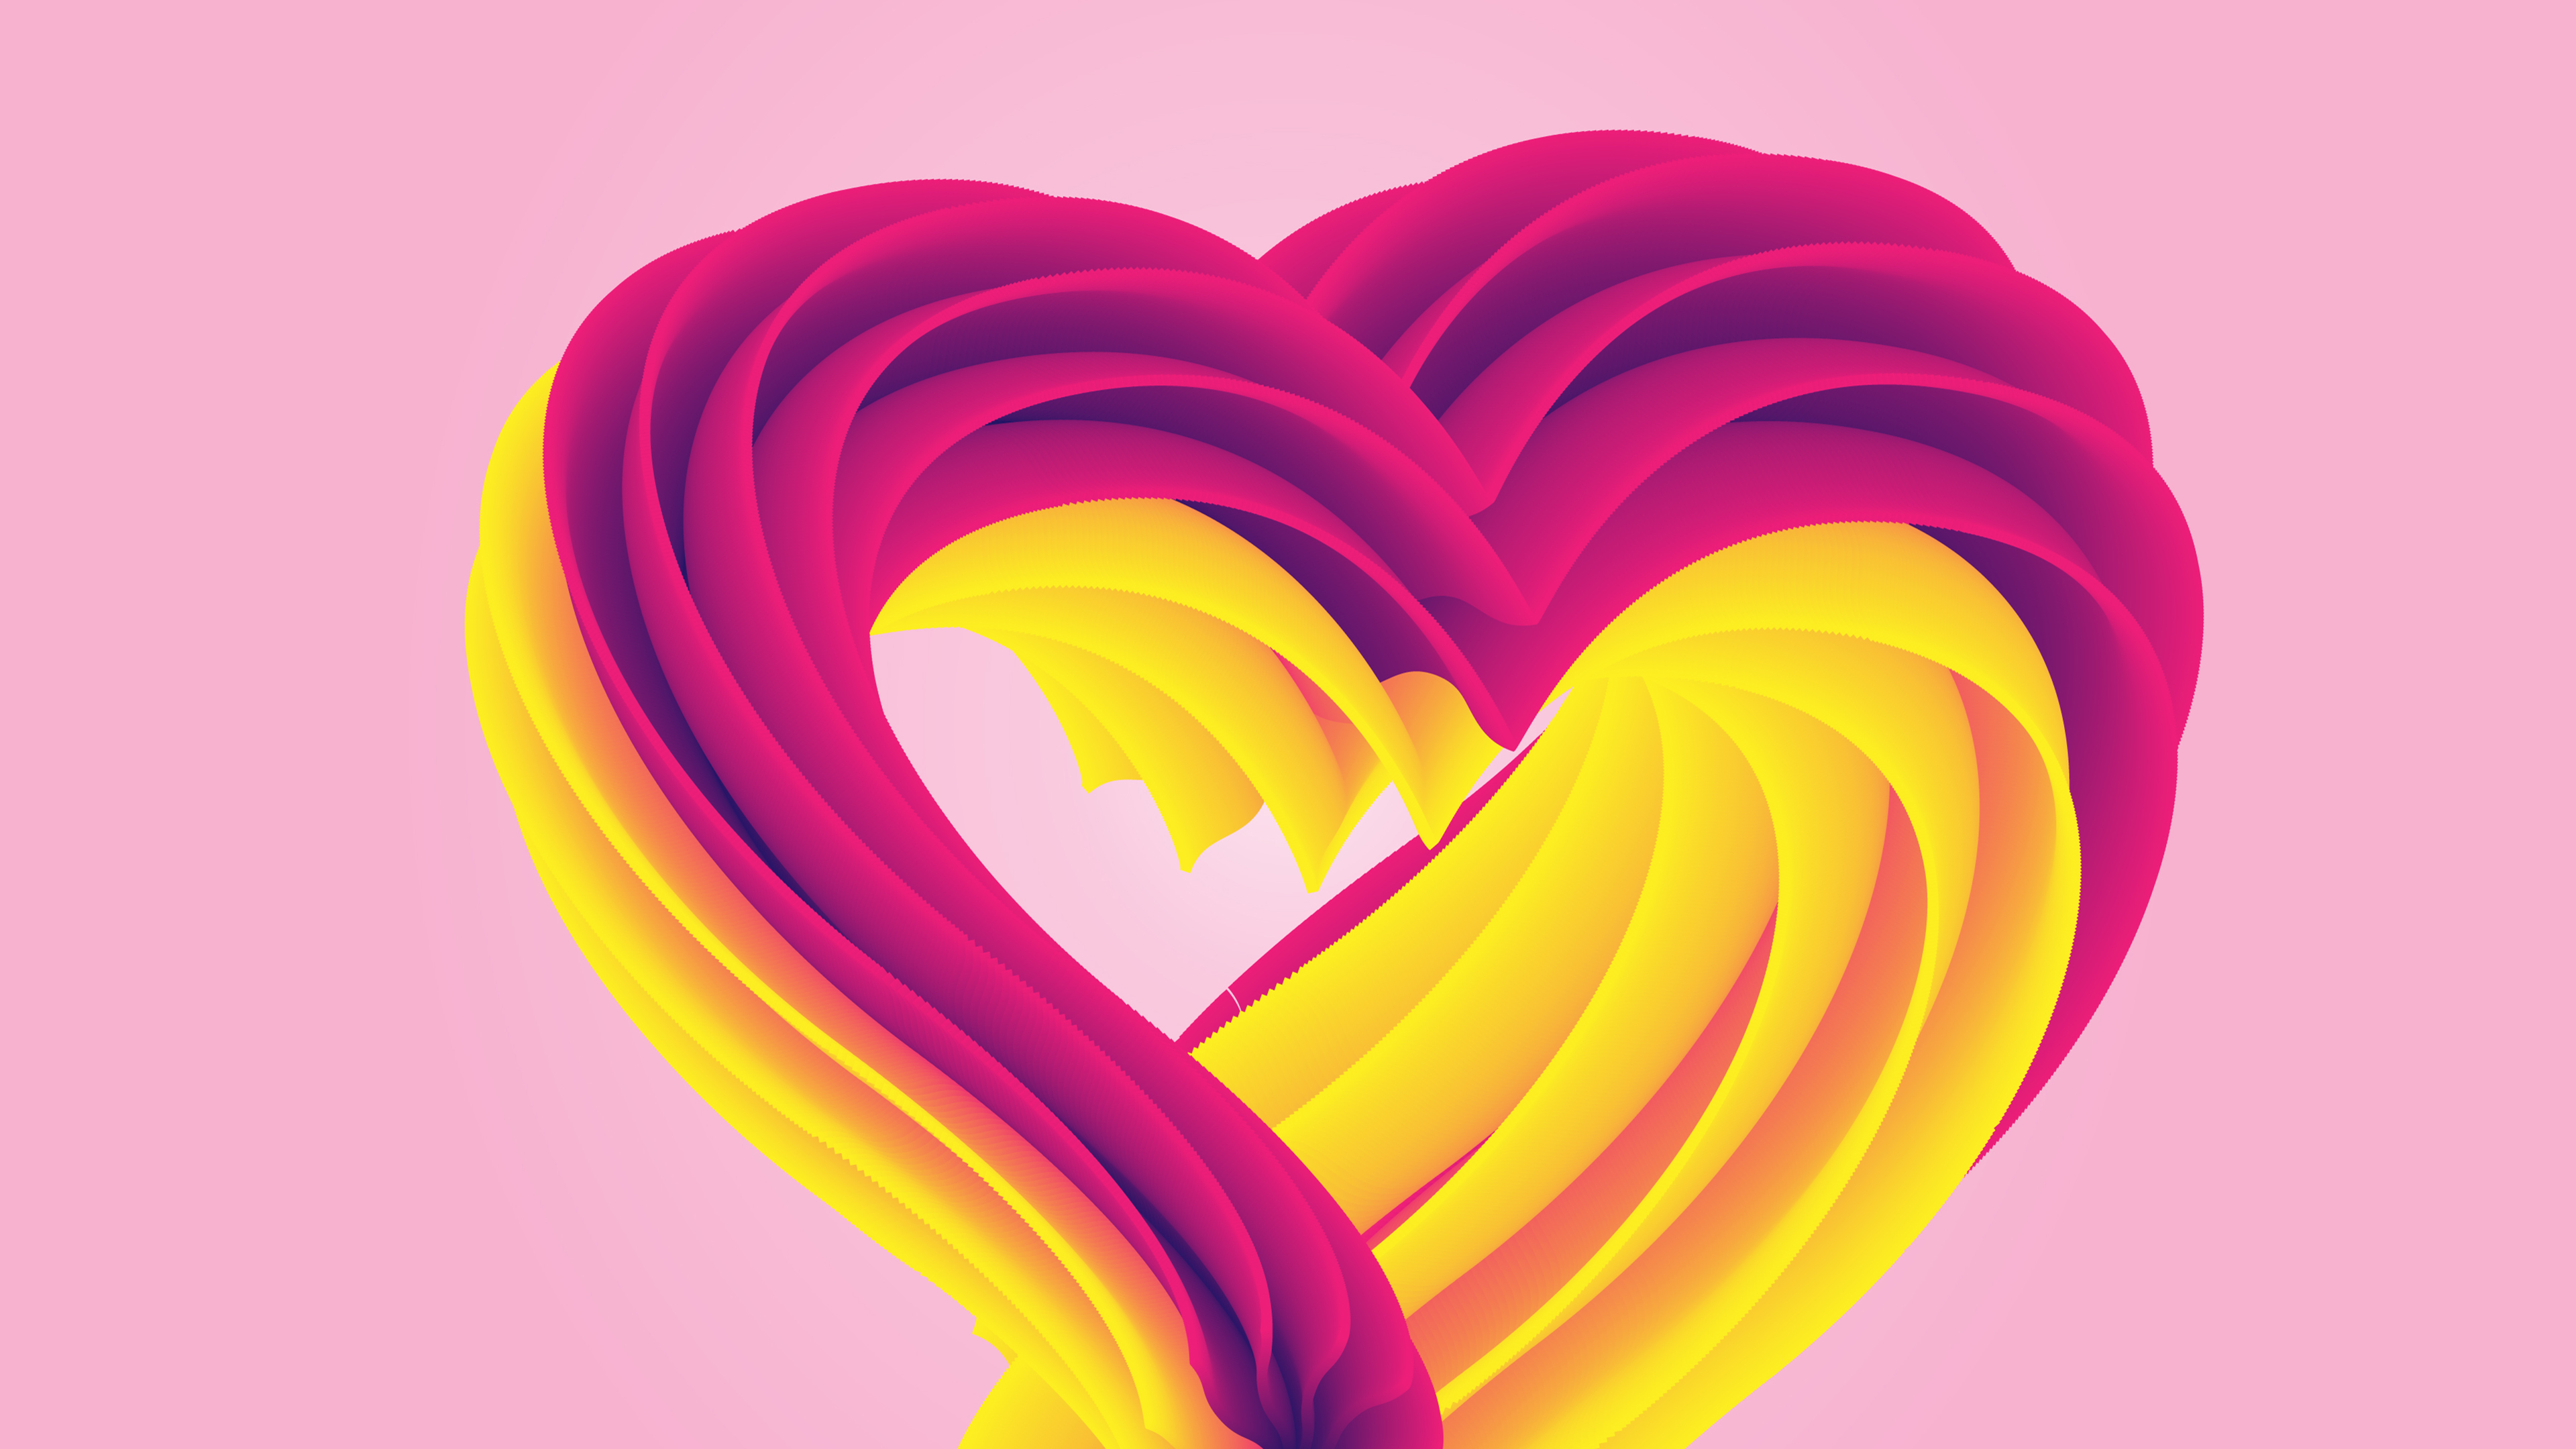 Love heart Wallpaper 4K, Pink background, Abstract, #8953